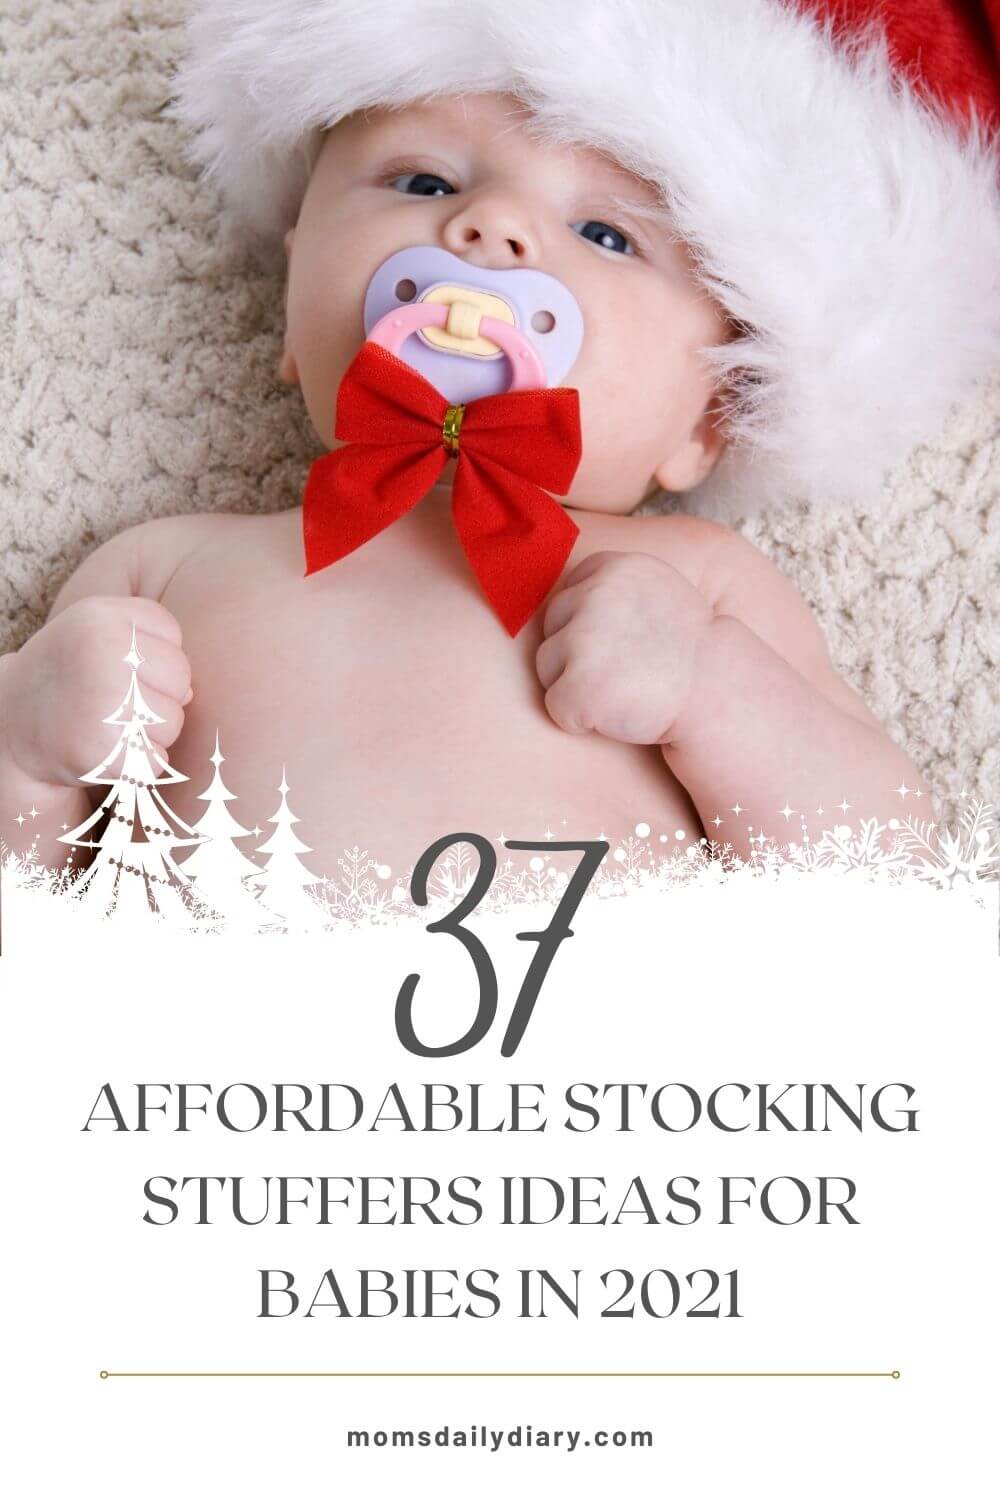 Pinterest pin with image of a baby in Christmas apparel and text "37 Affordable stocking stuffers for babies in 2021"